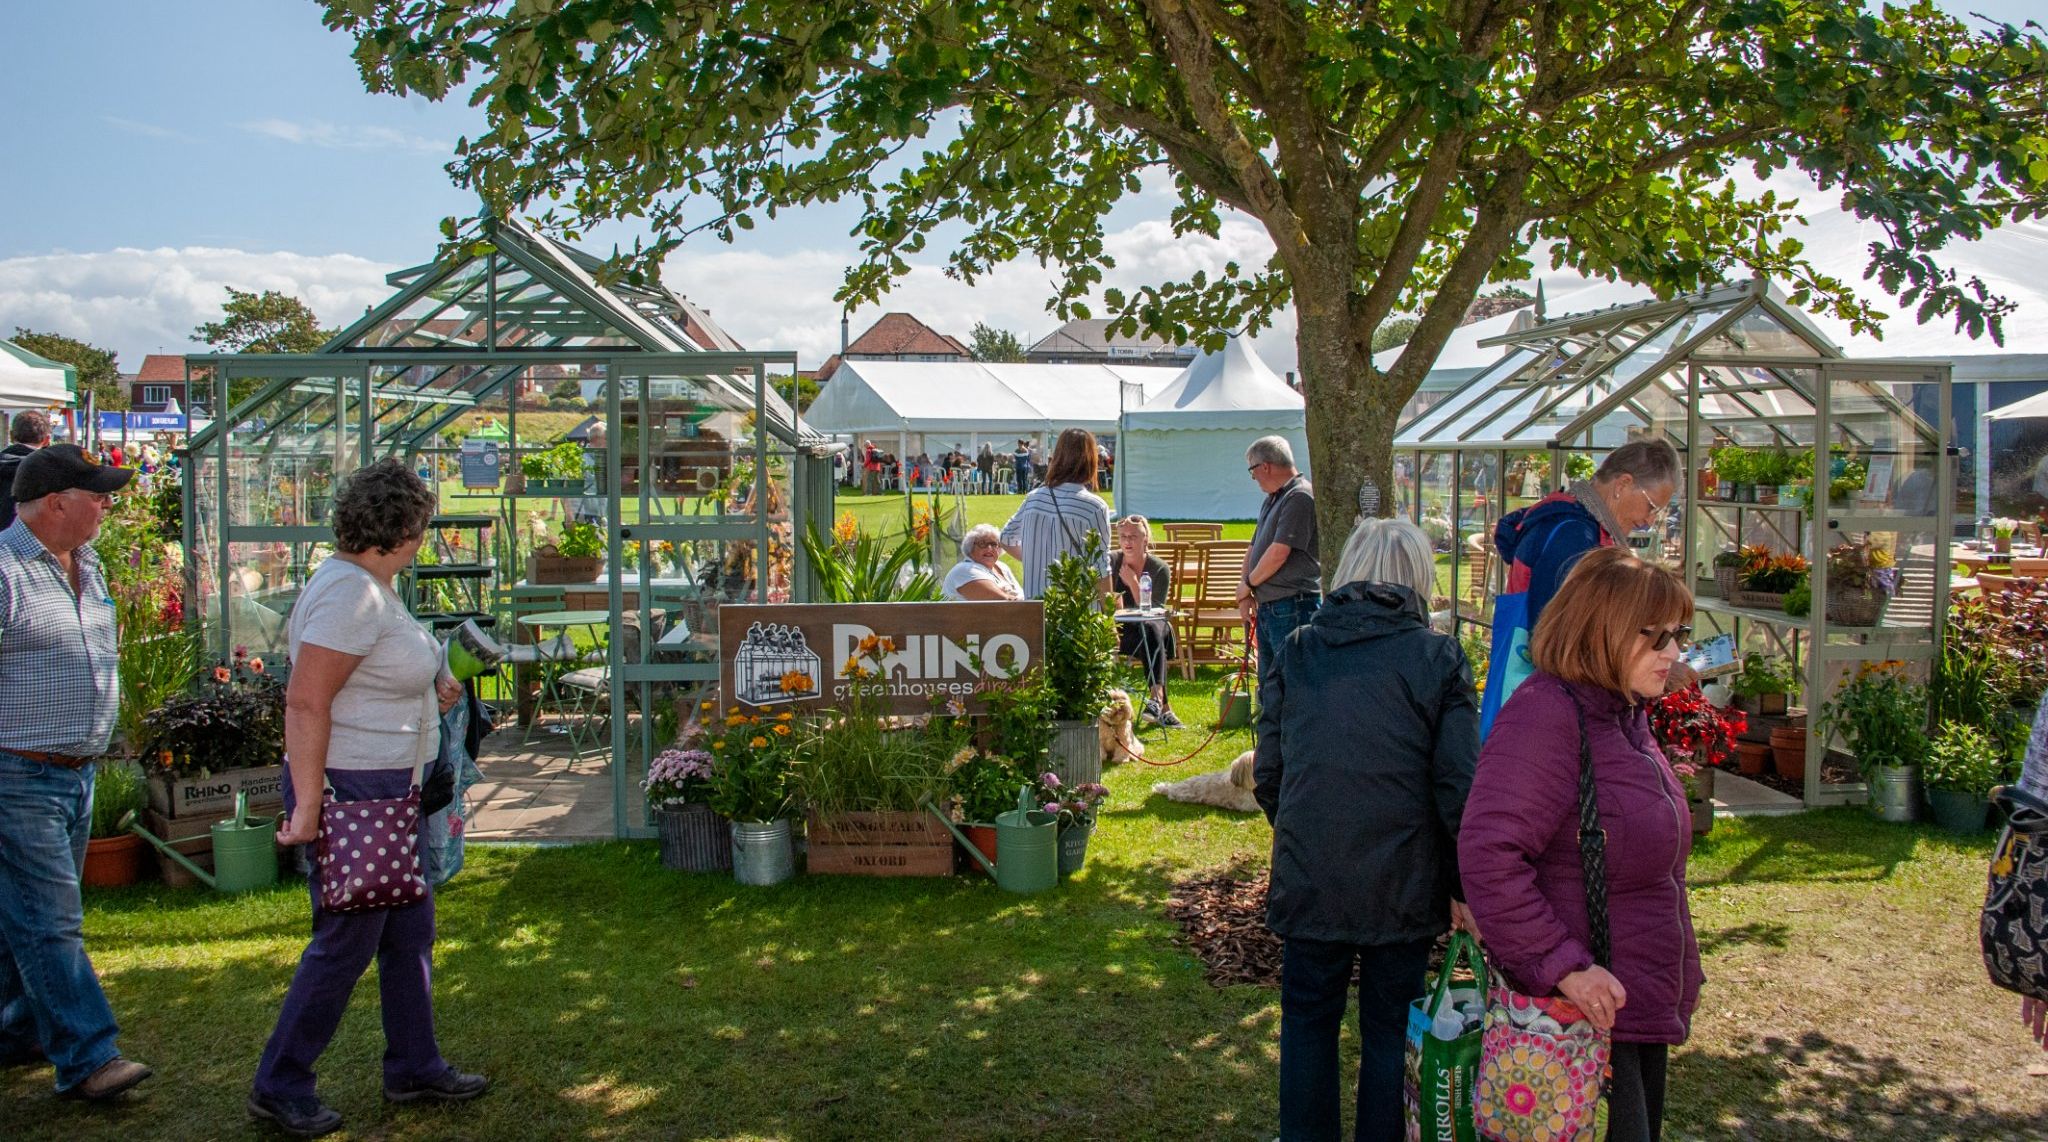 Southport Flower Show